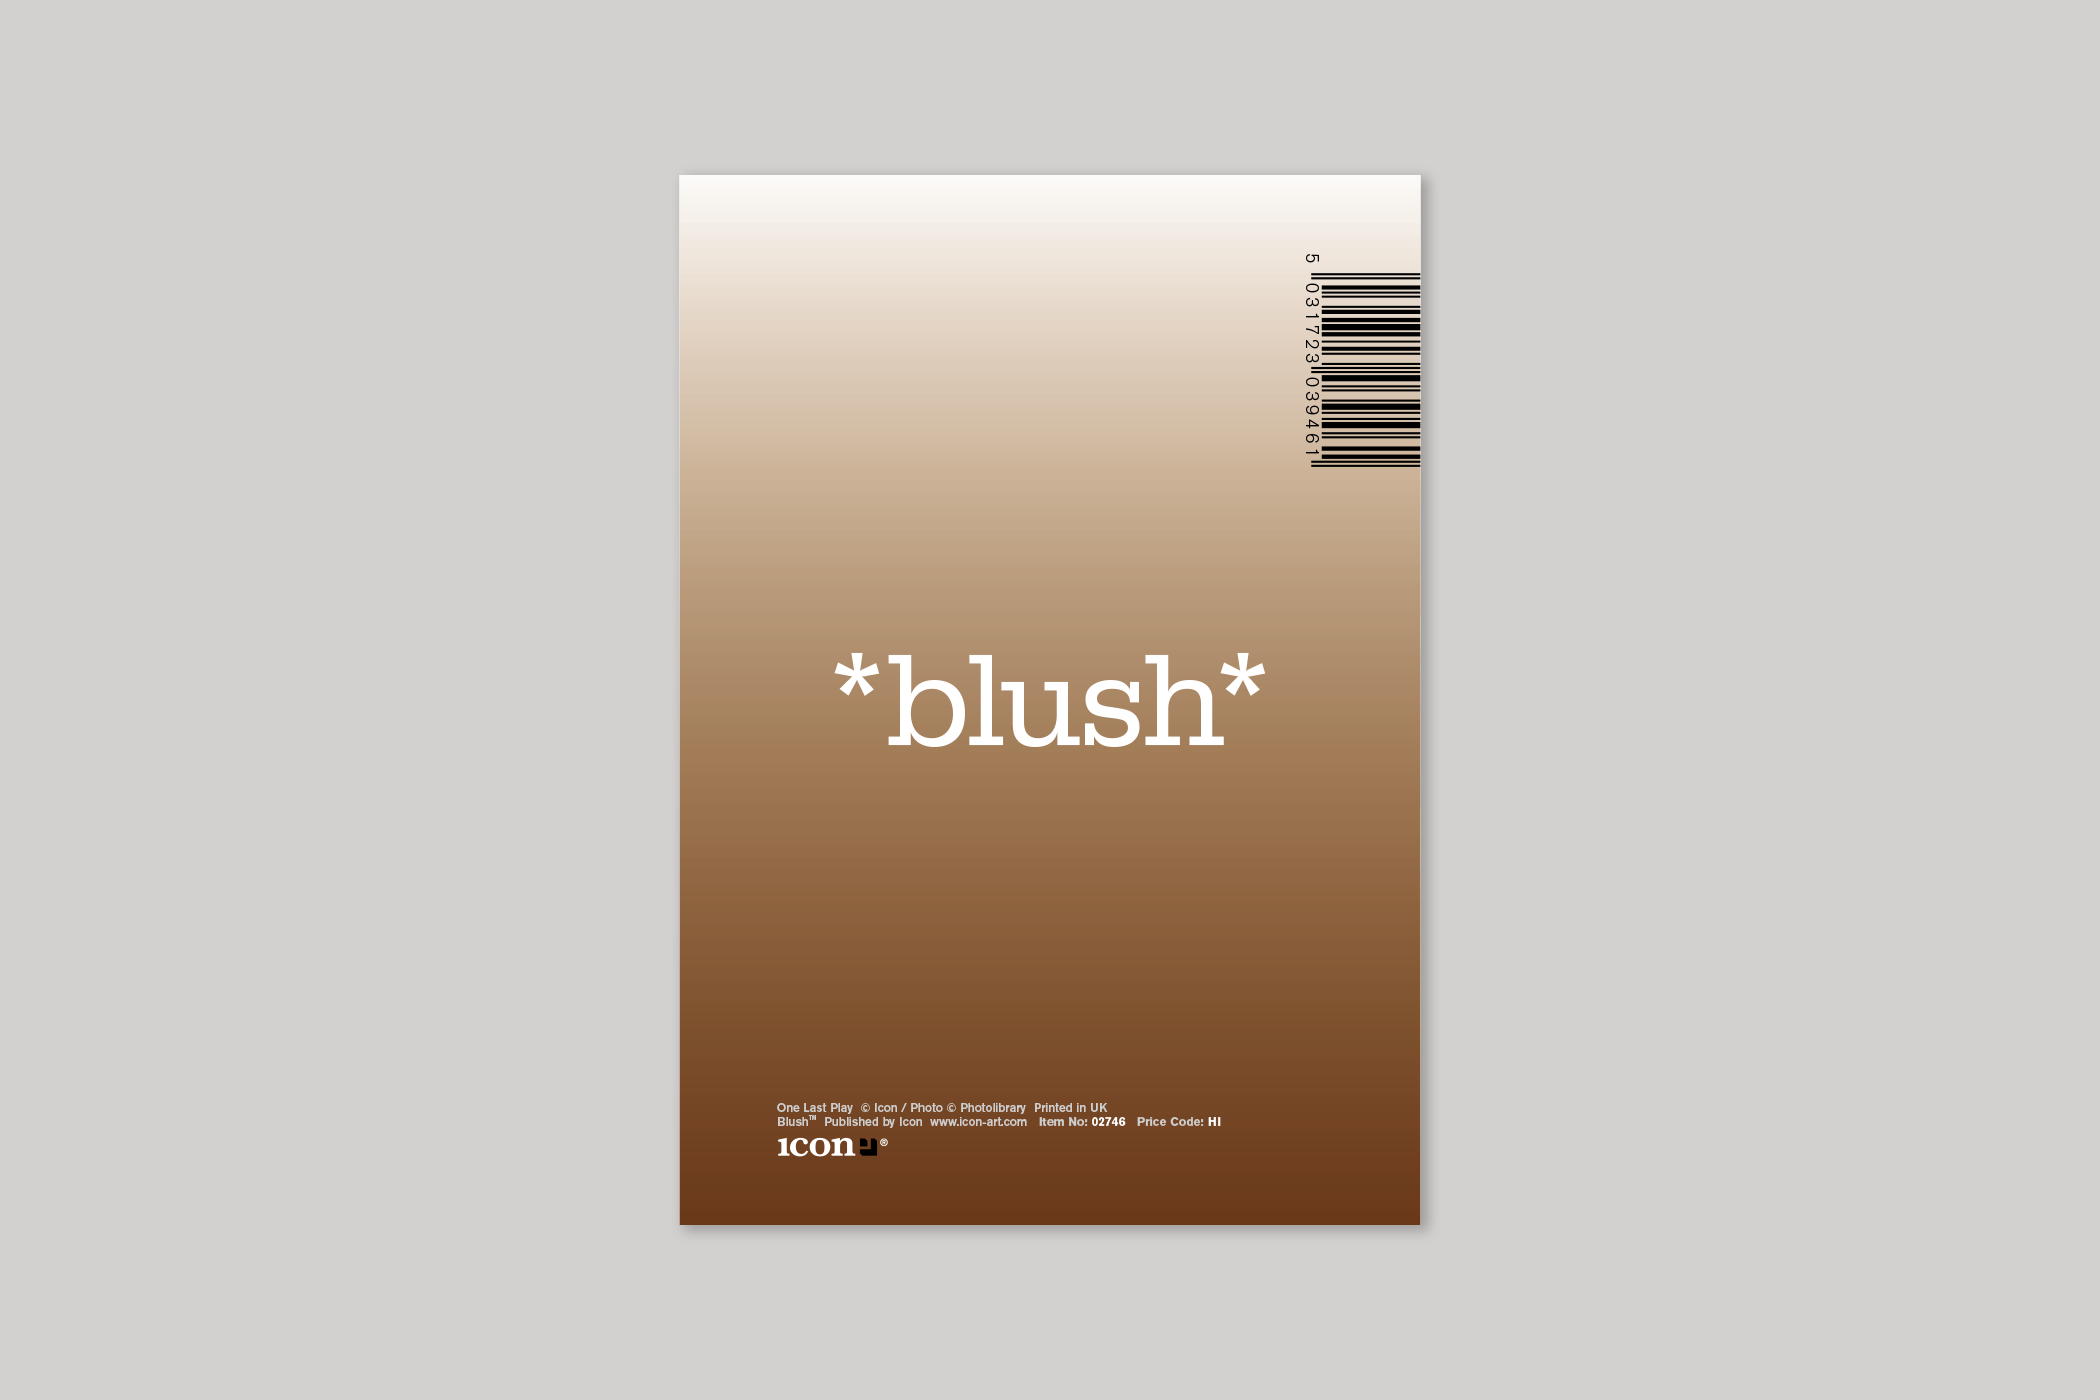 One Last Play from Blush humour range of greeting cards by Icon, with envelope.